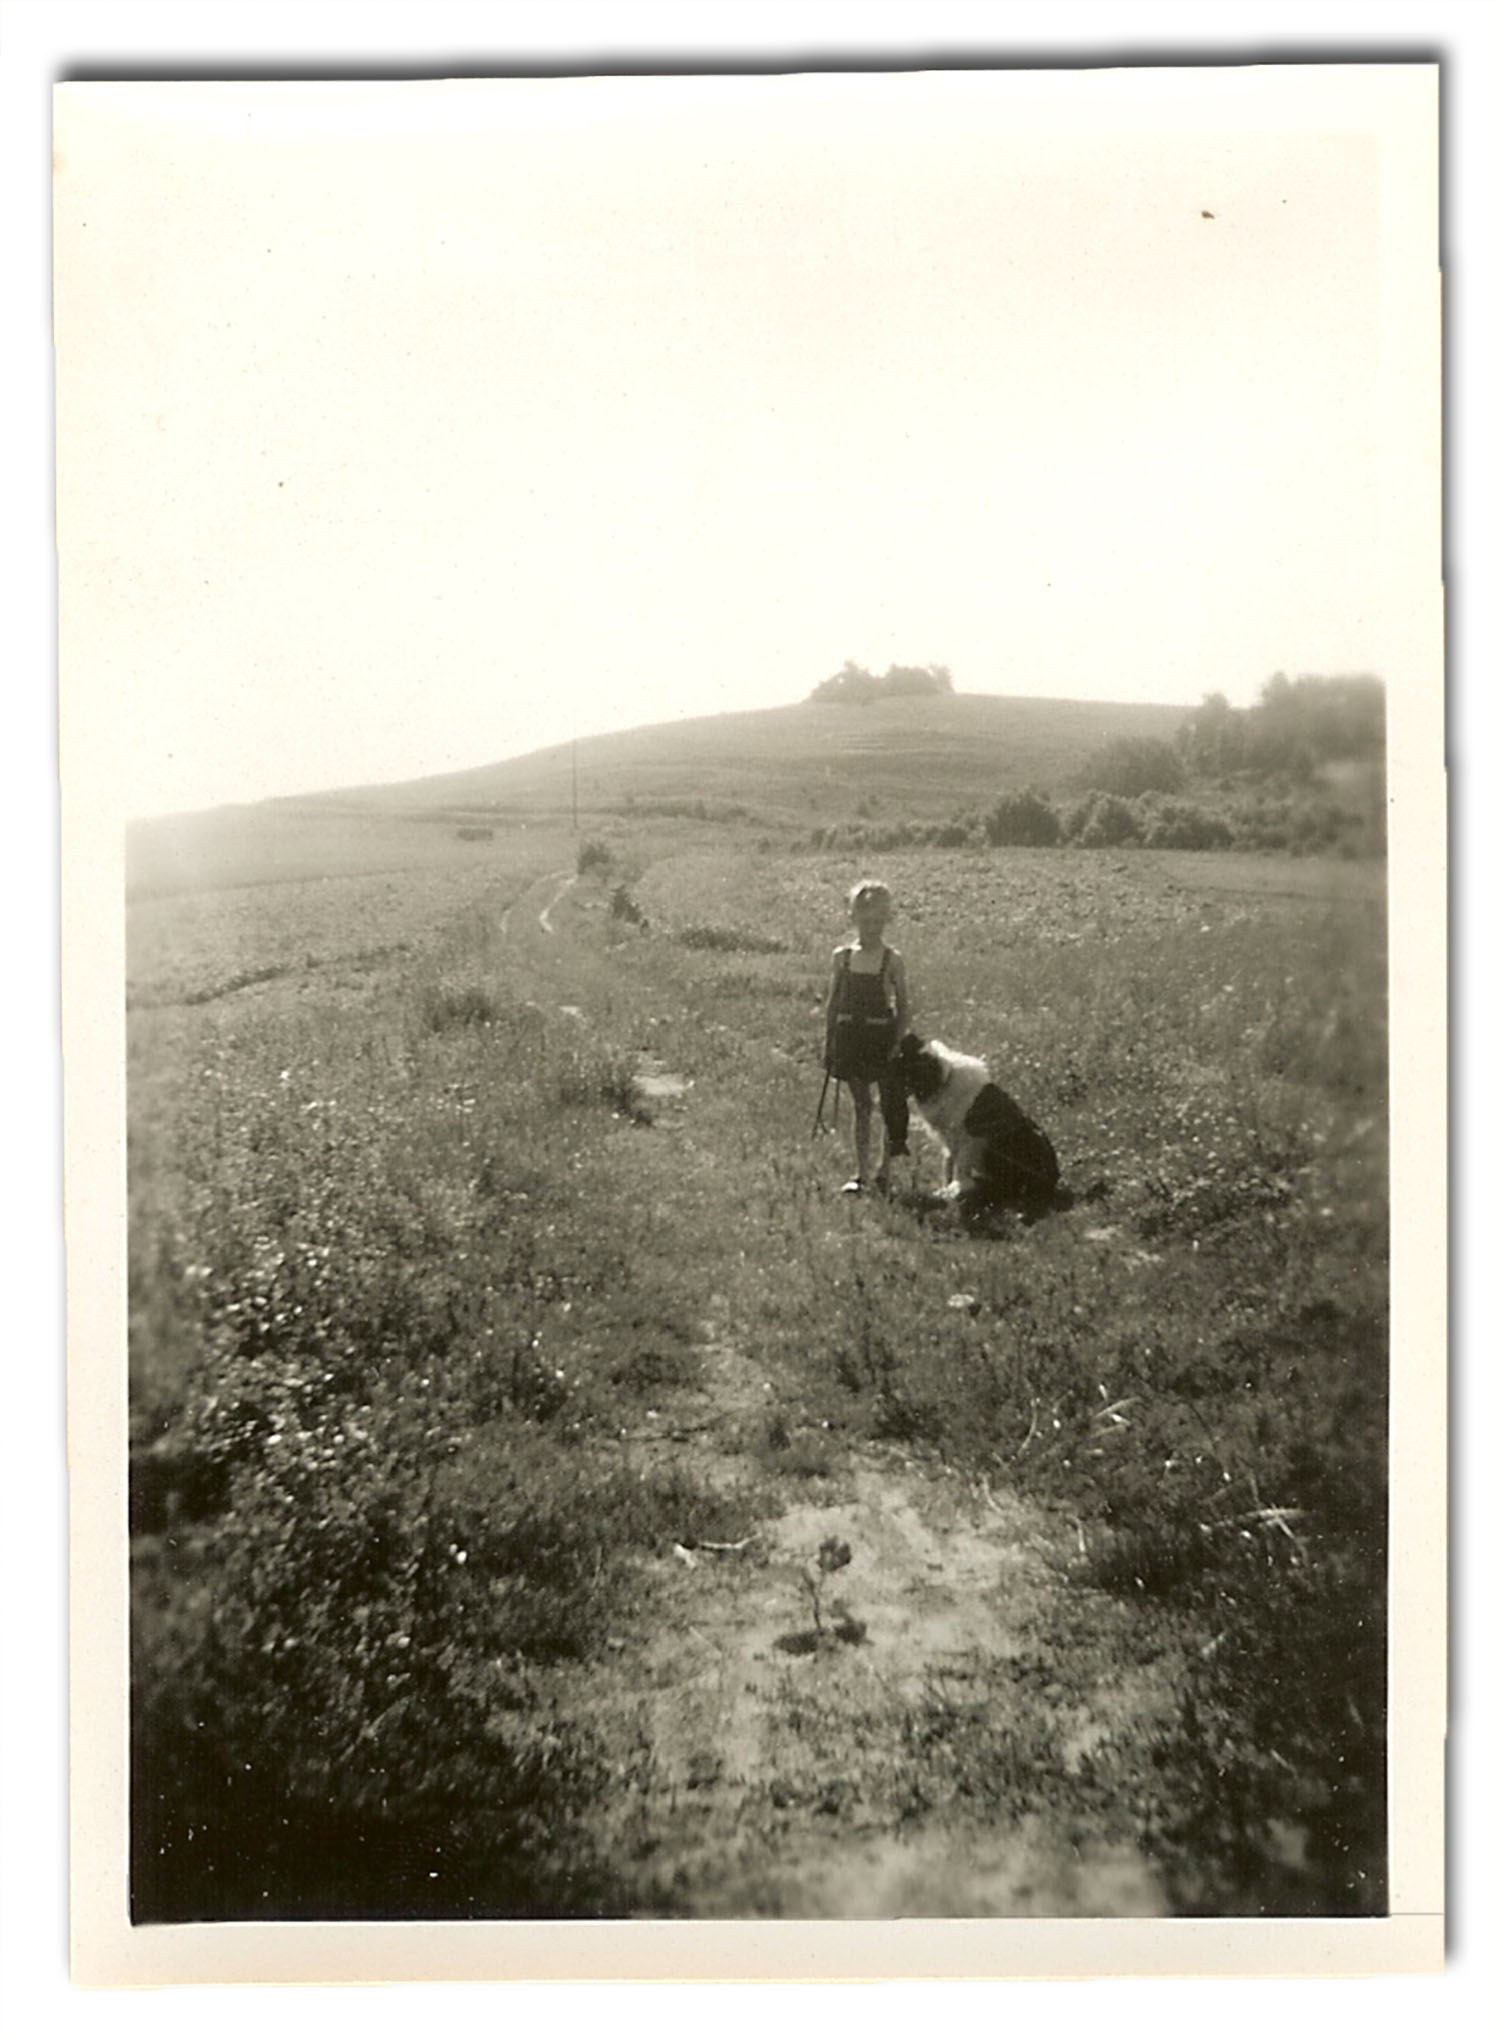 Jörgen together with the dog Lizzi. The bronze age grave Ornahögen is seen in the background.